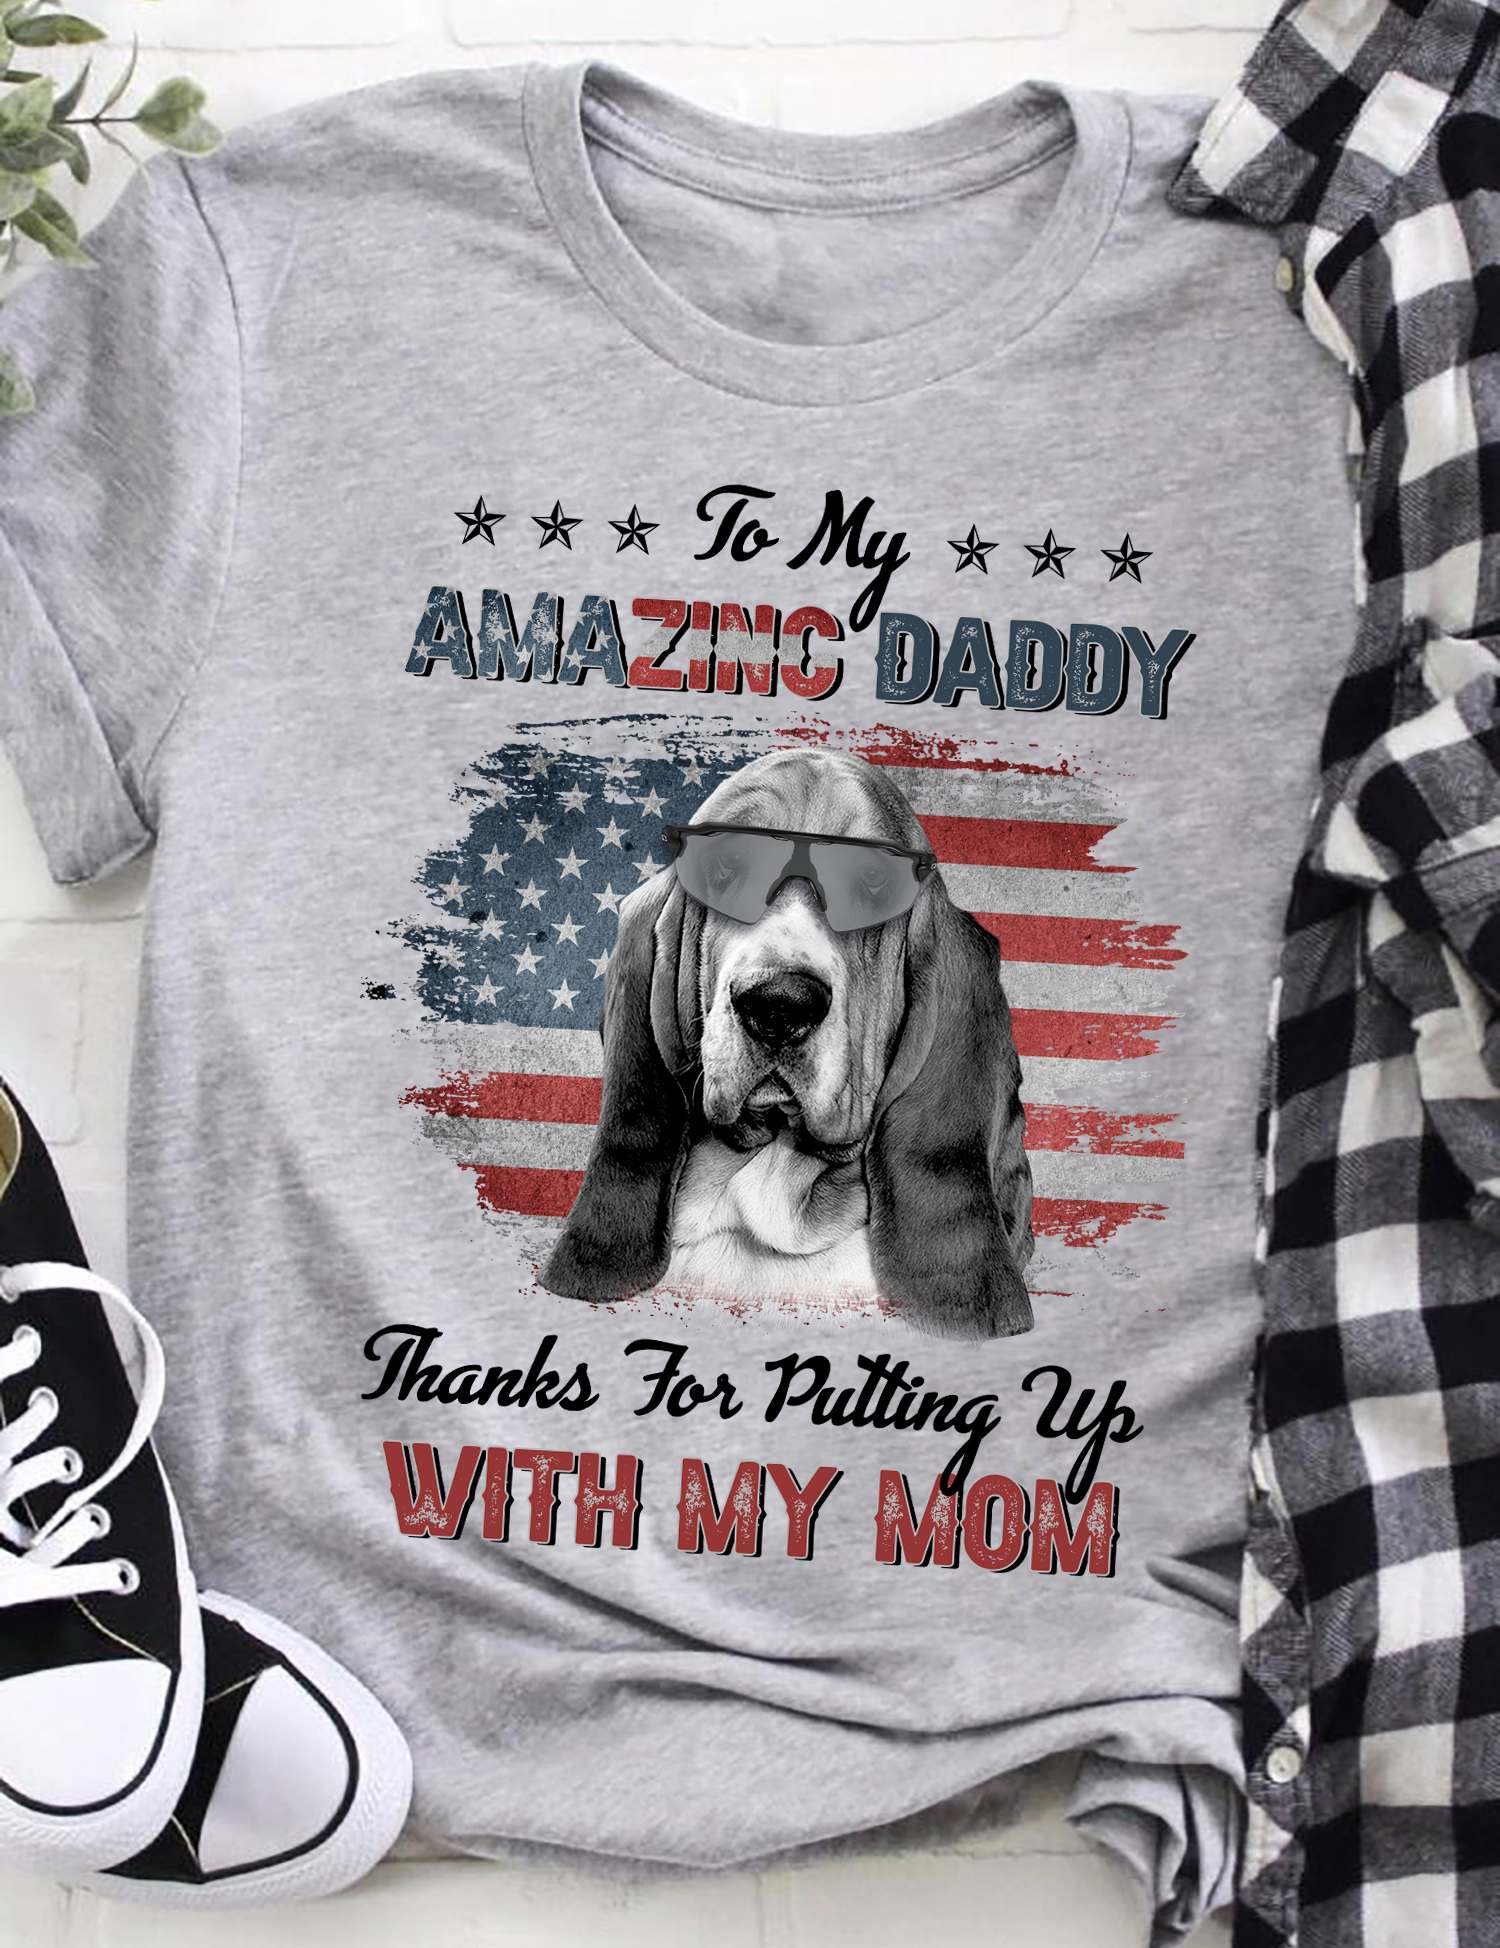 To my amazing daddy thanks for putting up with my mom - Basset hounds